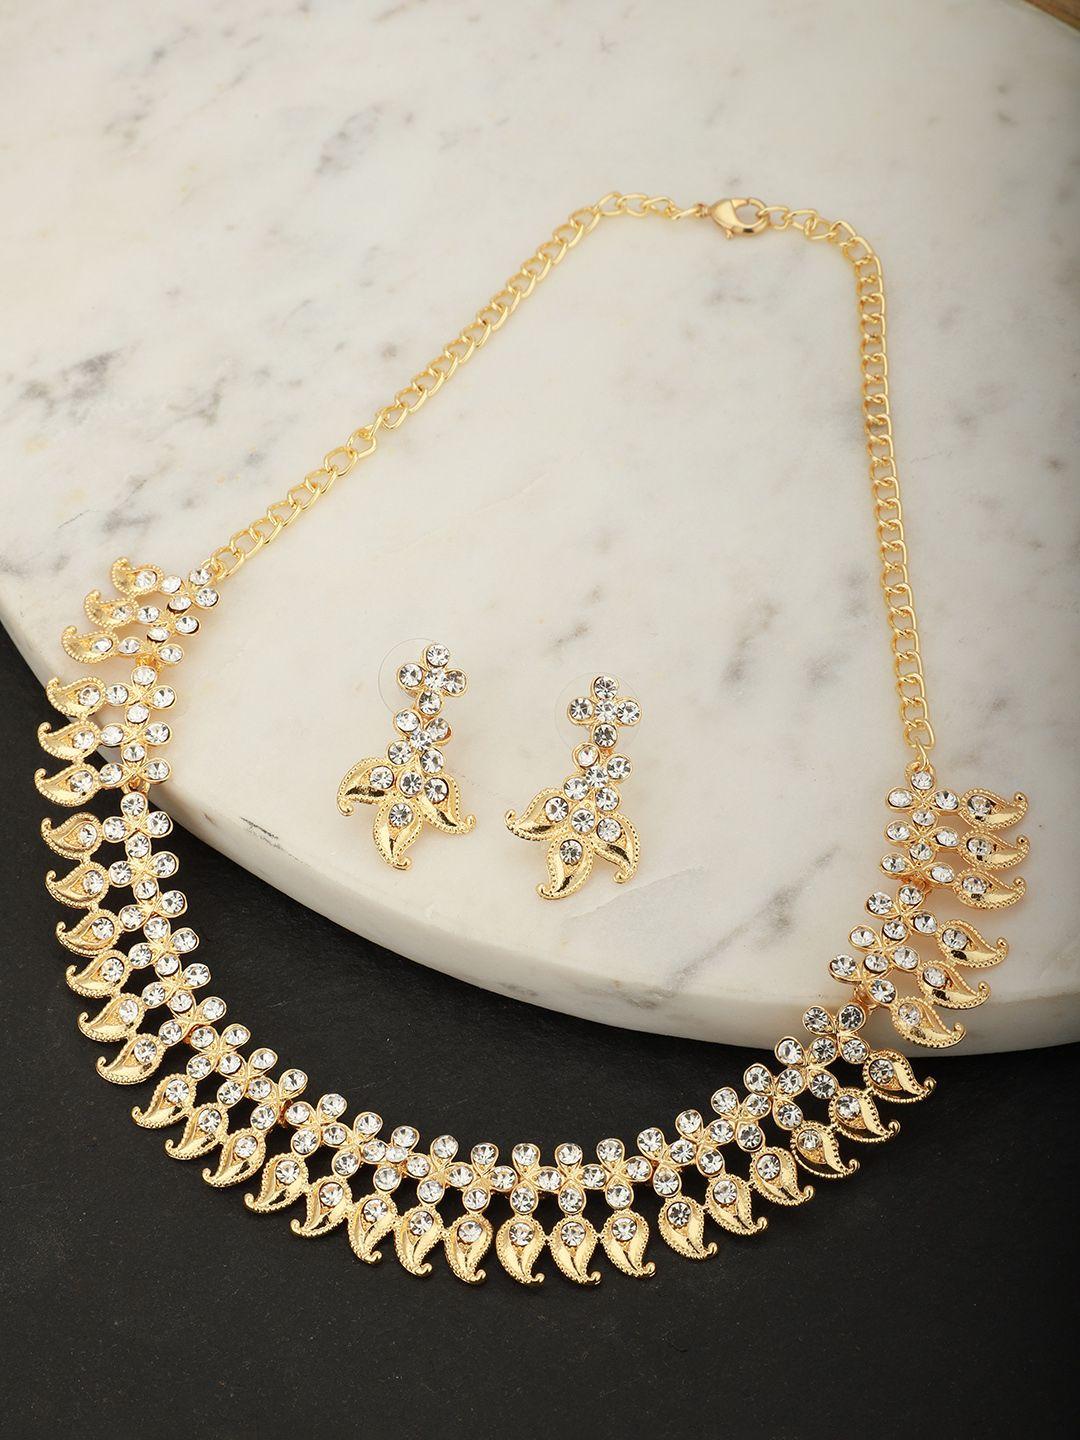 carlton london gold-plated cz-studded handcrafted jewellery set